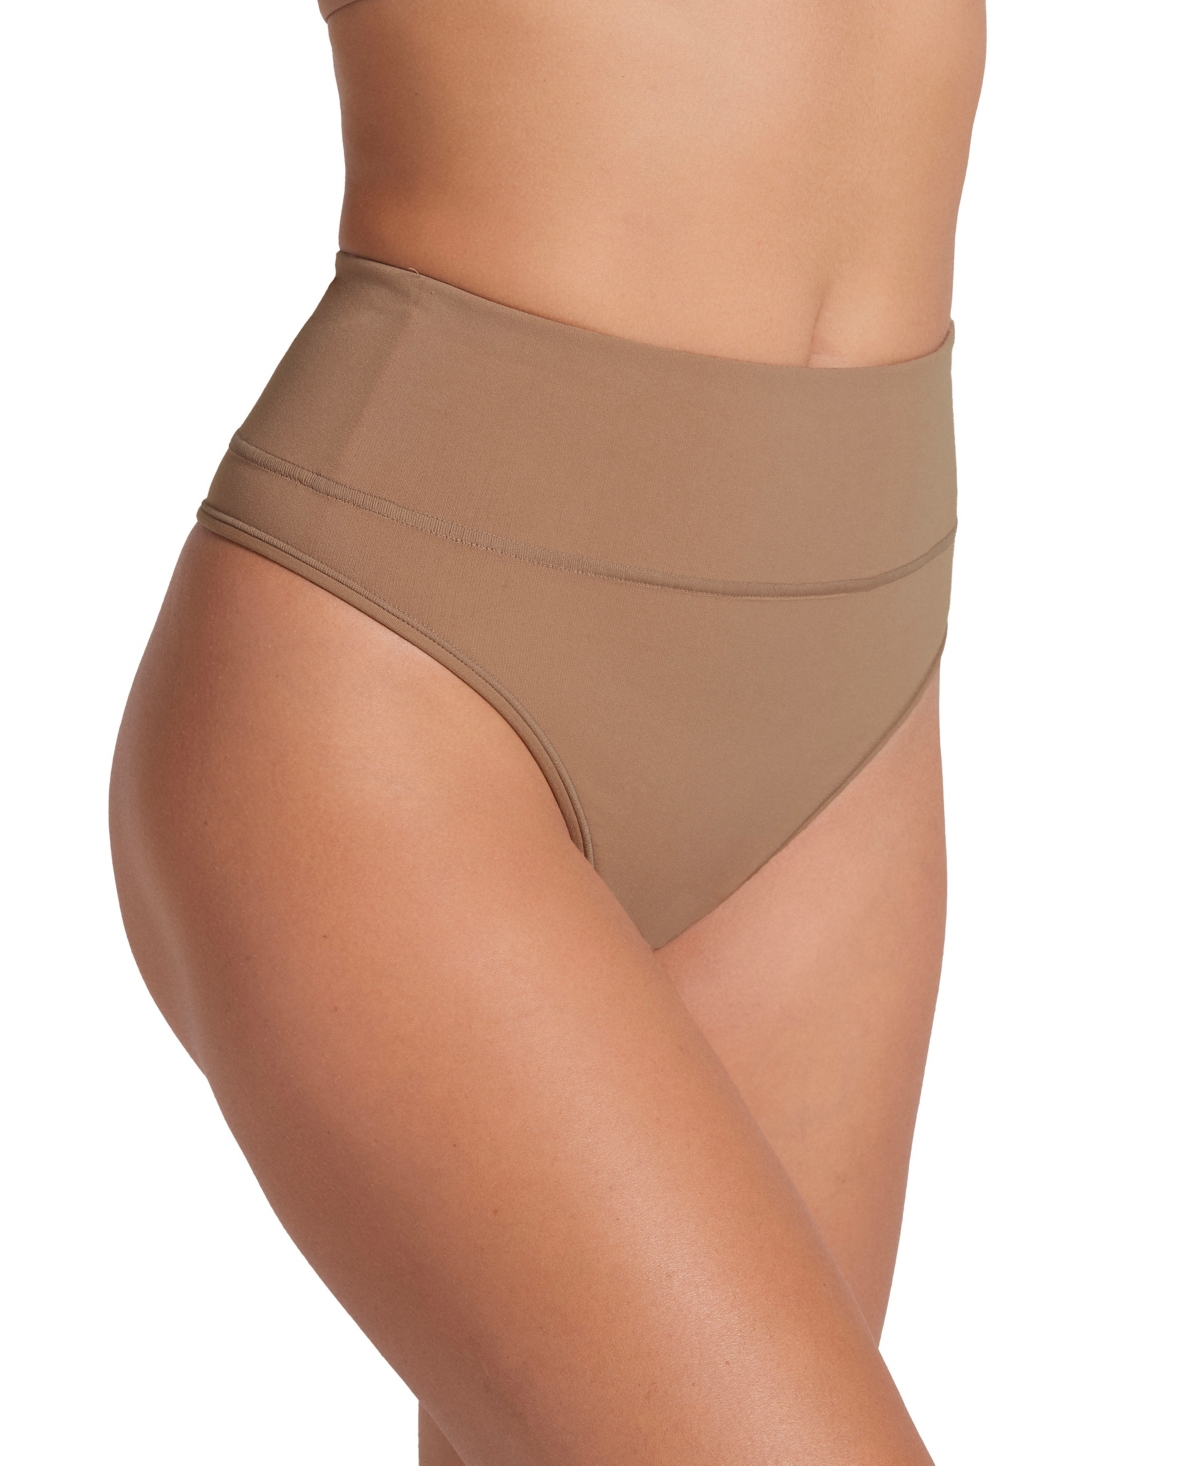 Leonisa Women's High-waisted Seamless Moderate Shaper Thong Panty In Brown